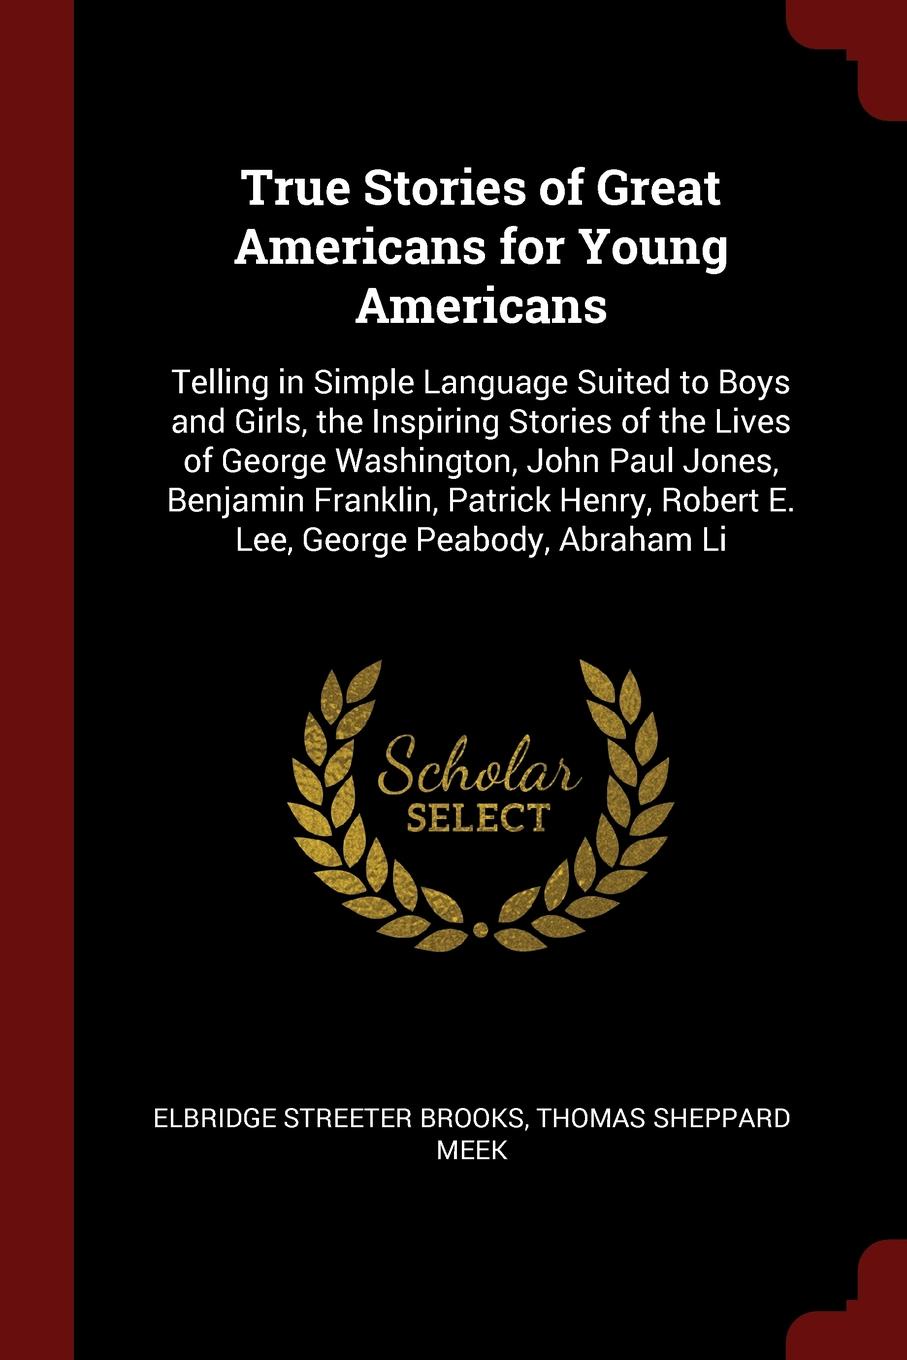 True Stories of Great Americans for Young Americans. Telling in Simple Language Suited to Boys and Girls, the Inspiring Stories of the Lives of George Washington, John Paul Jones, Benjamin Franklin, Patrick Henry, Robert E. Lee, George Peabody, Ab...